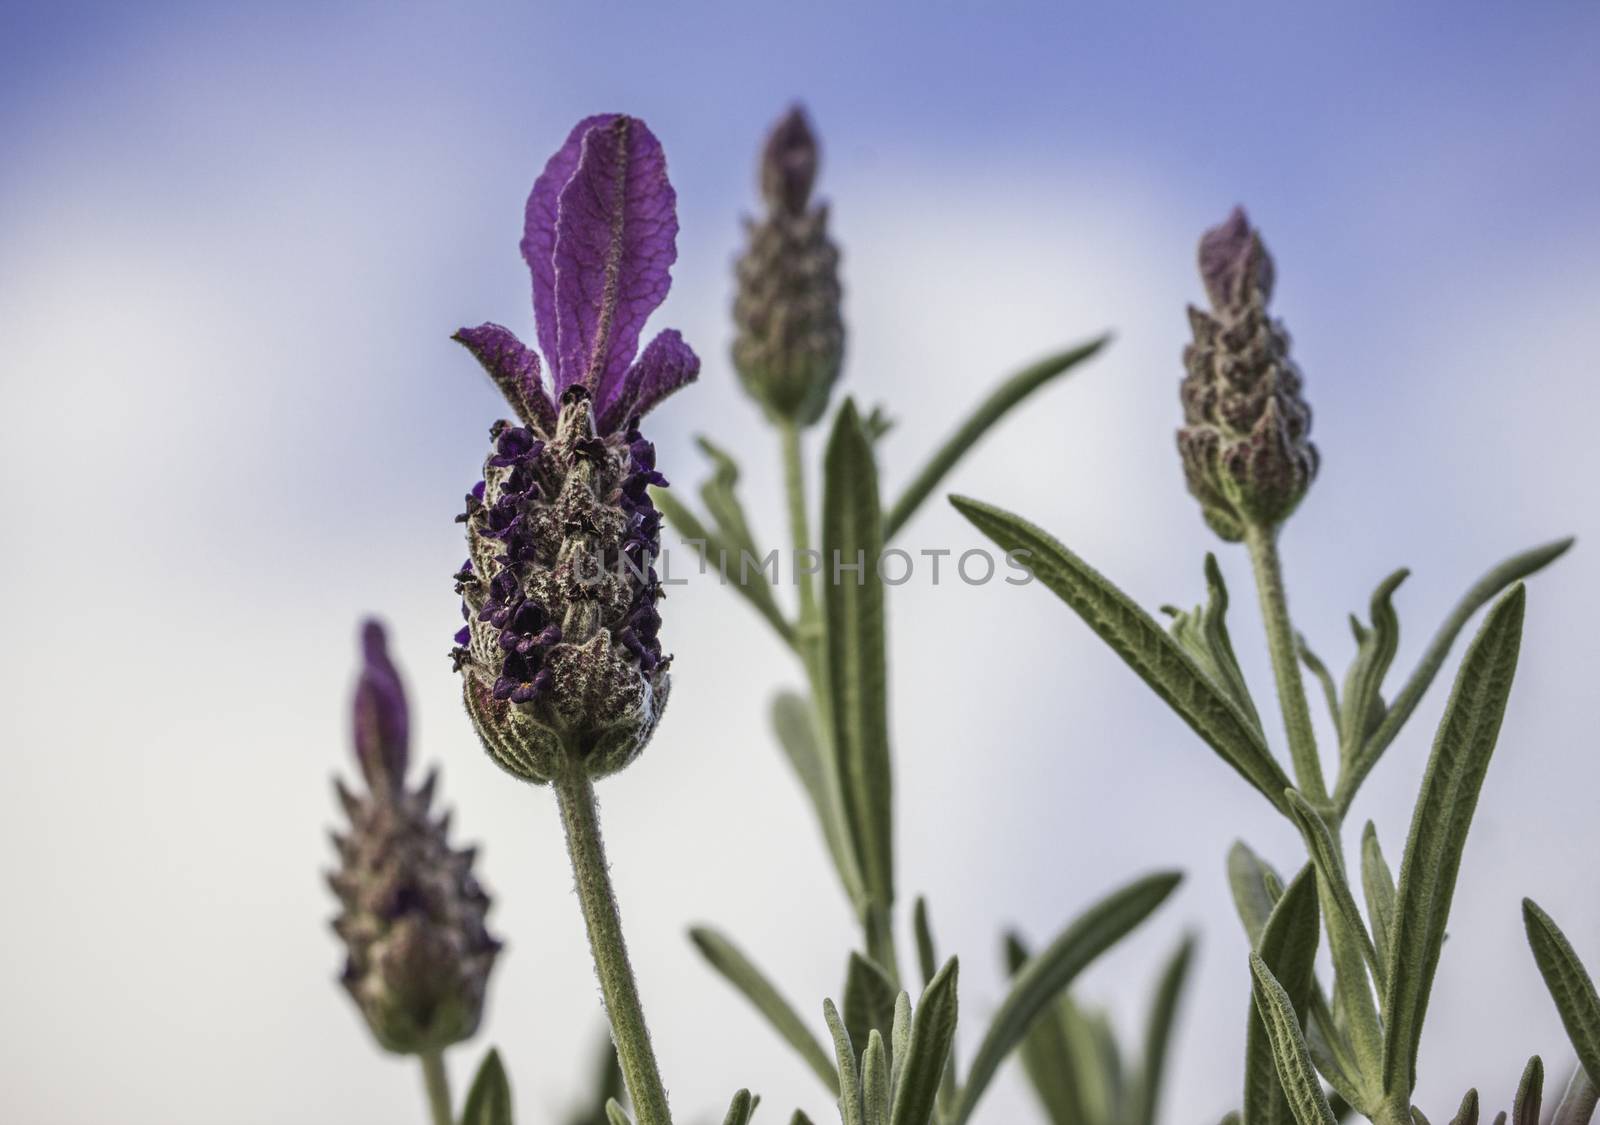 Lavender Flower Against Blue and White Sky Background by keneaster